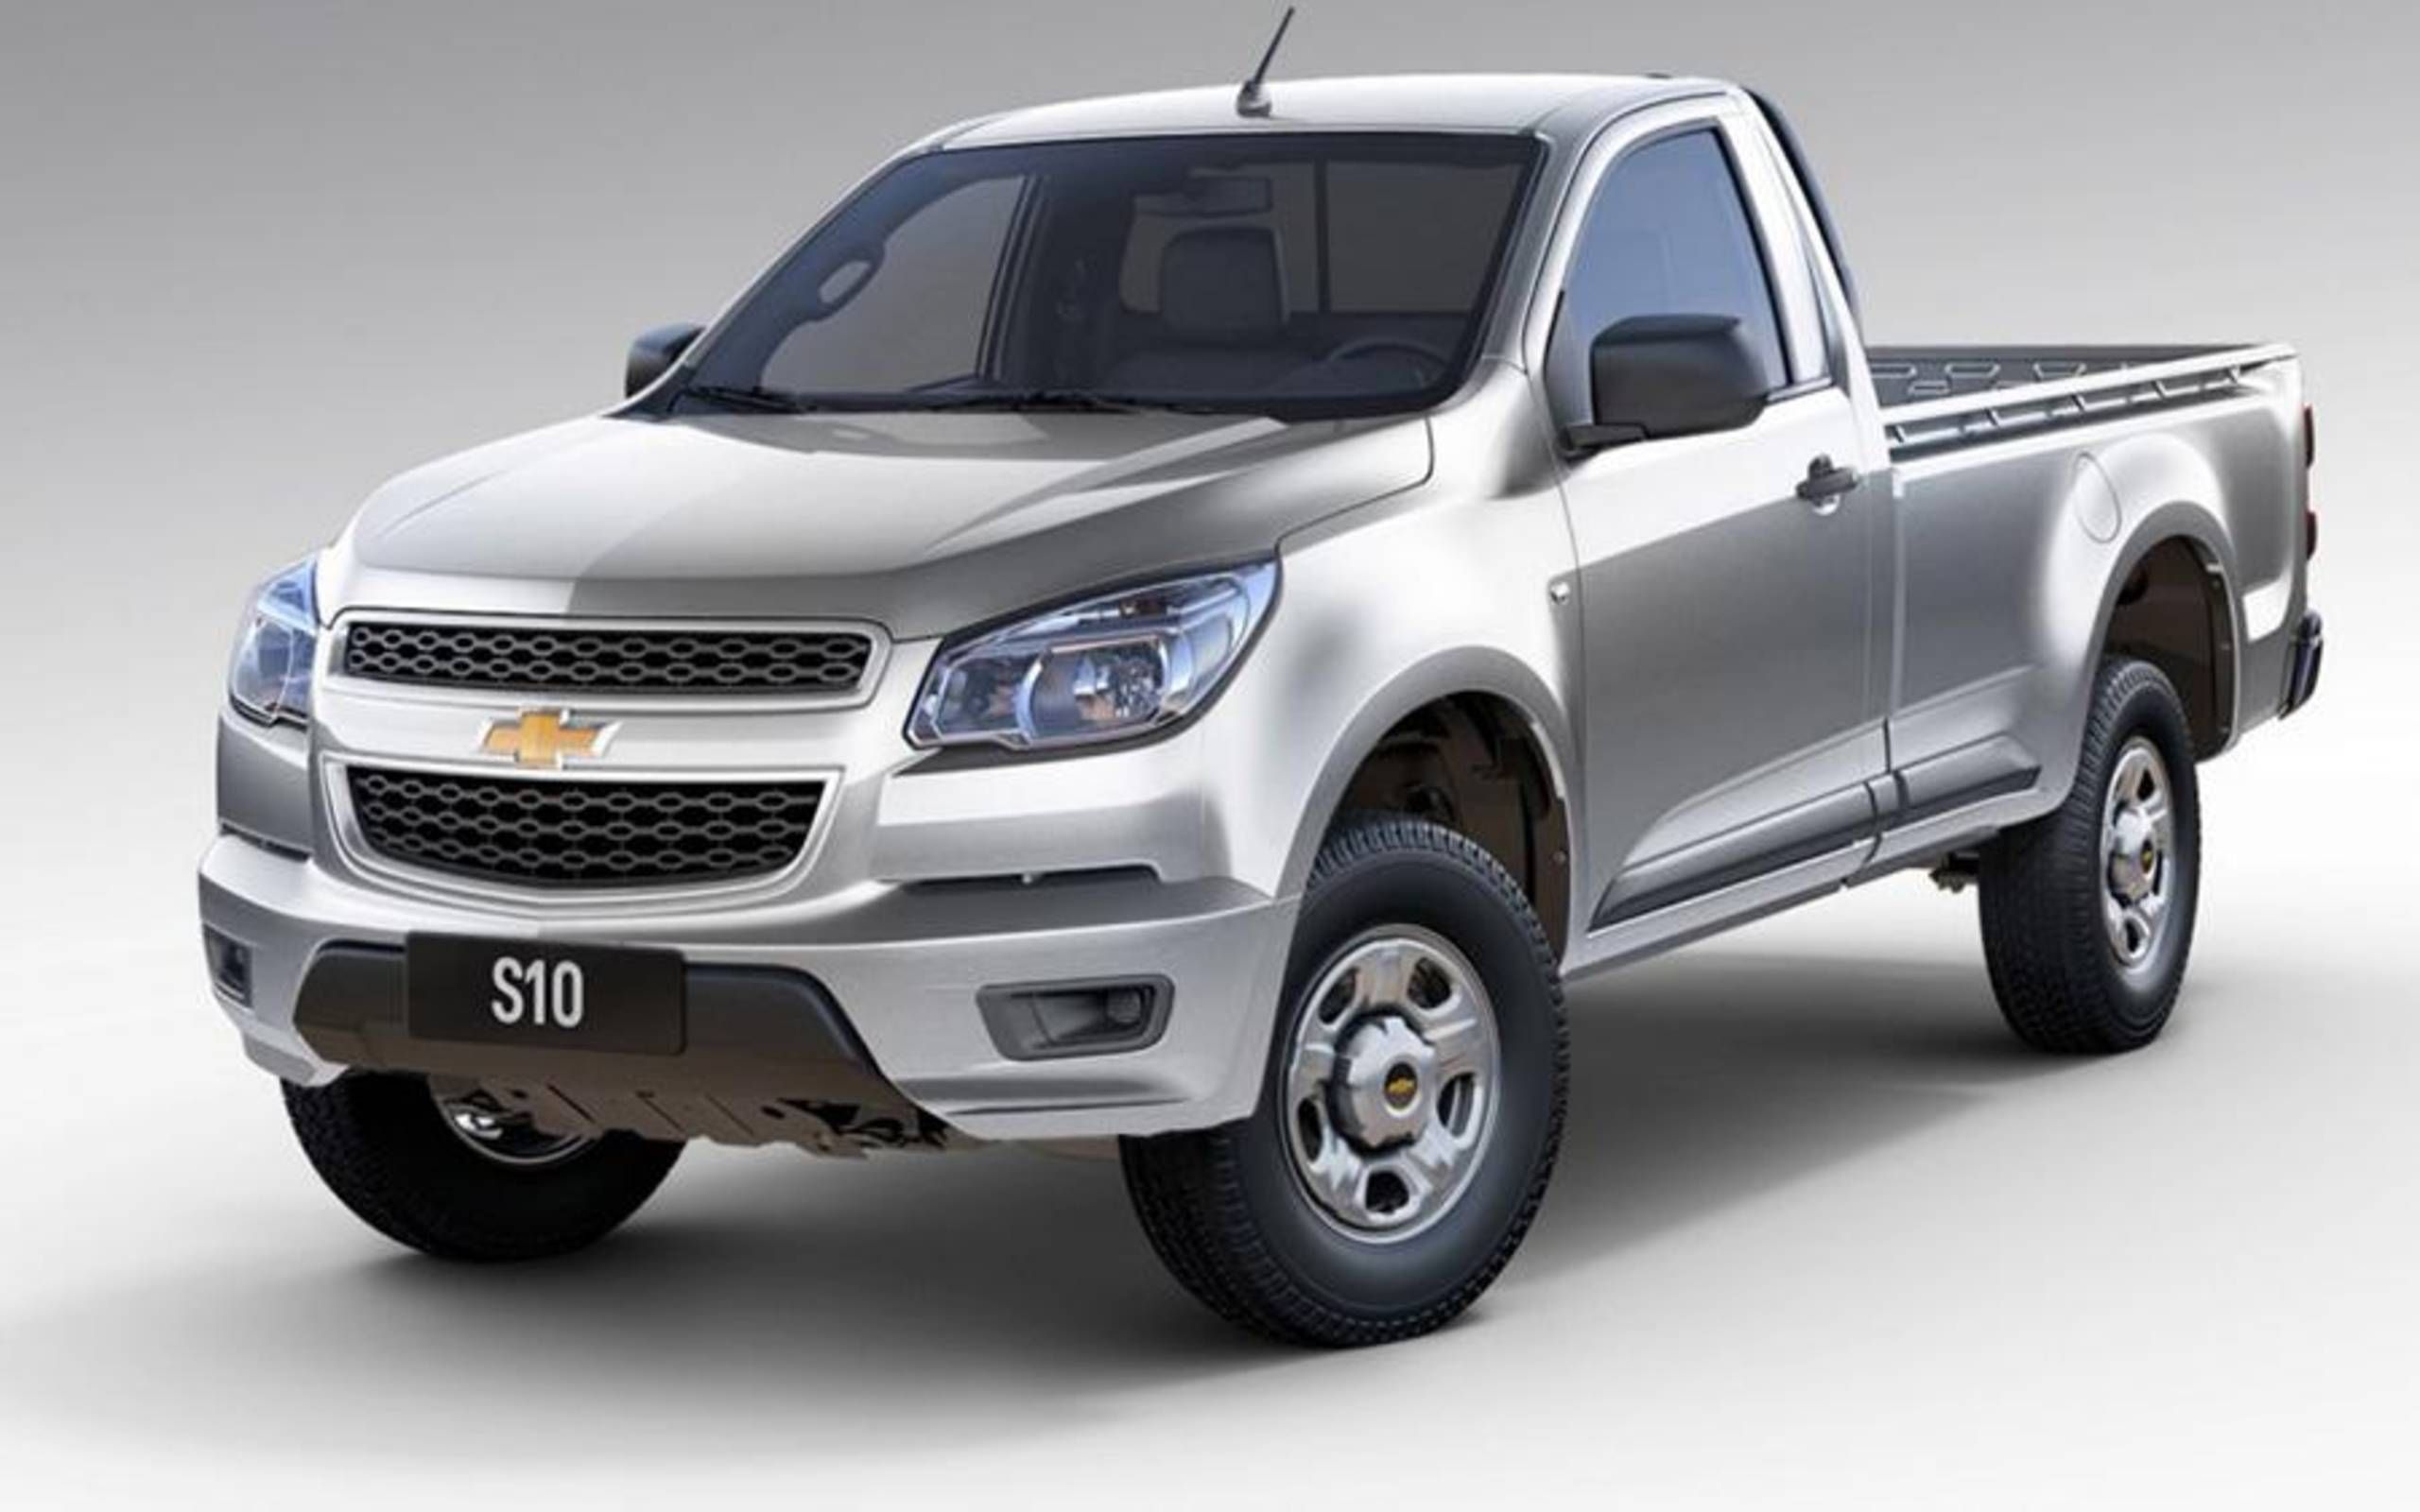 Would you buy a Chevrolet S10?